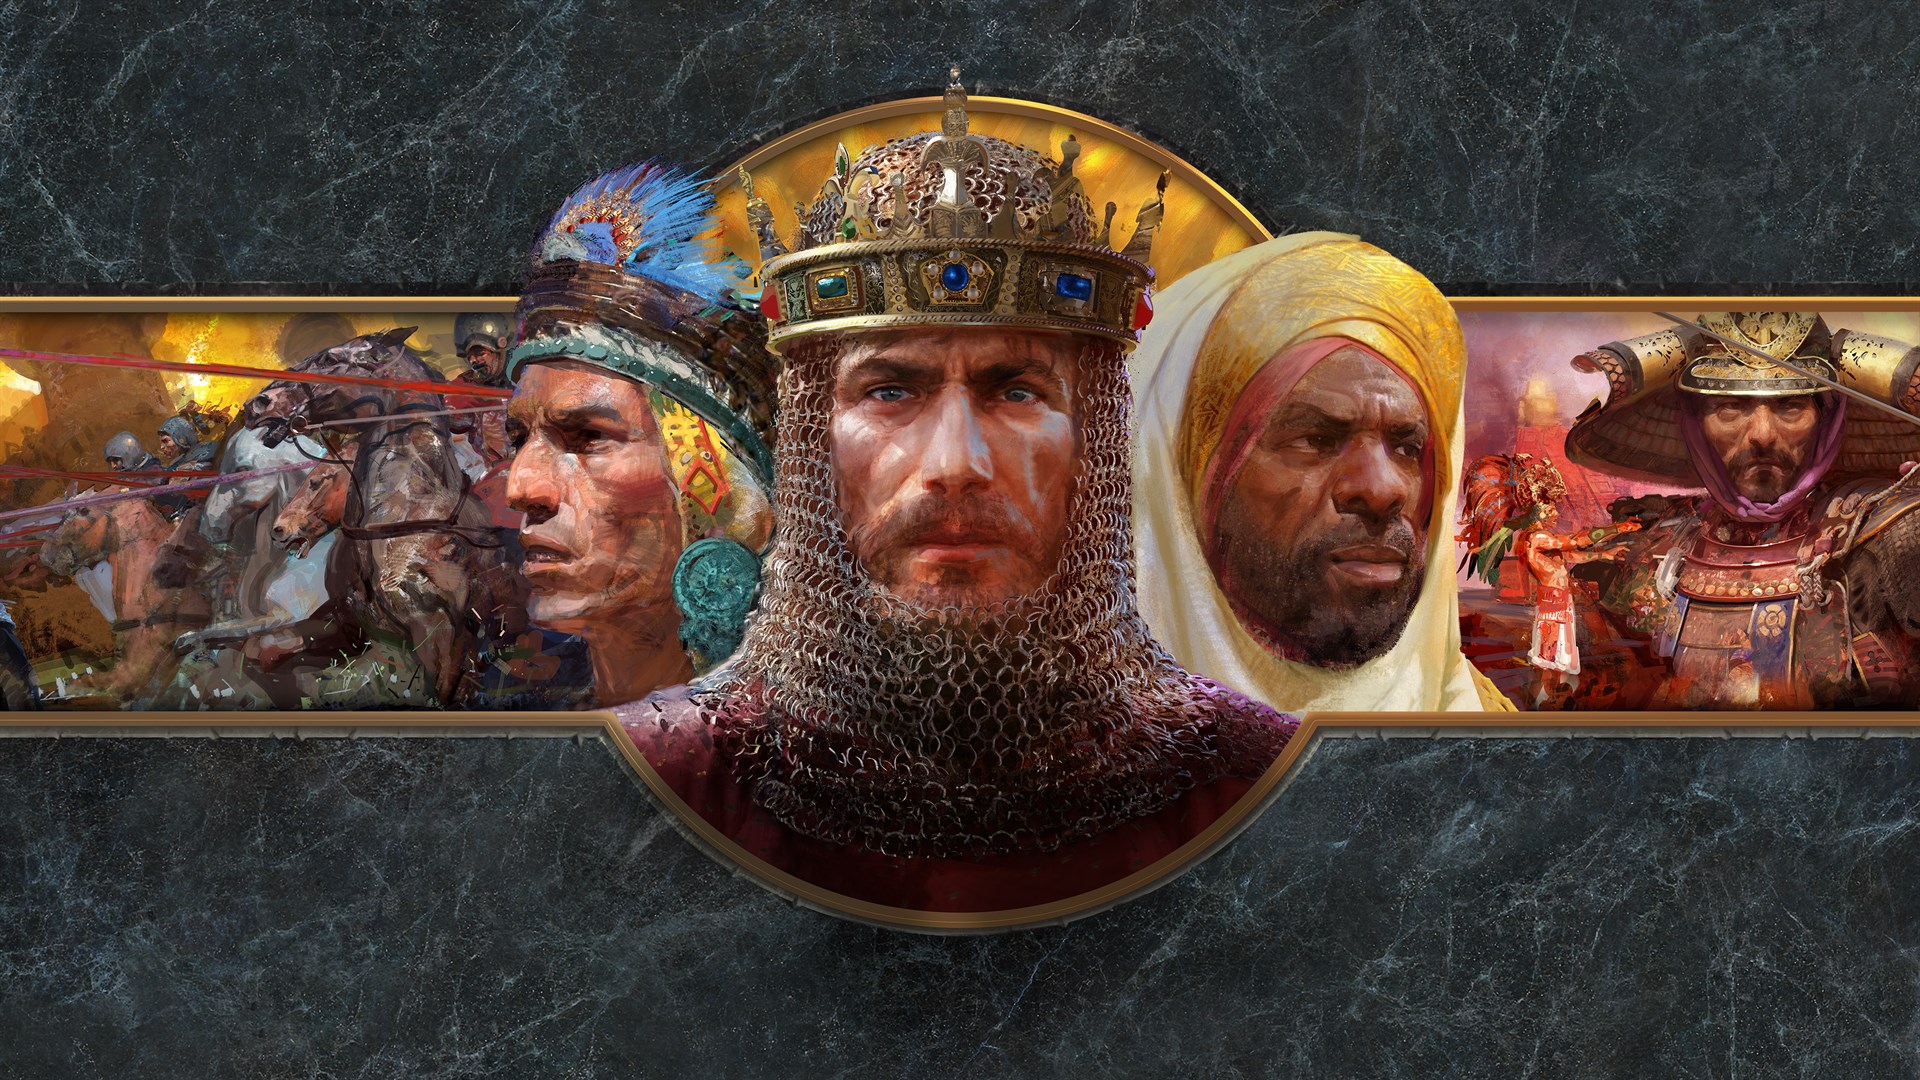 Age of empires 2 hd edition 1920x1080 wallpaper